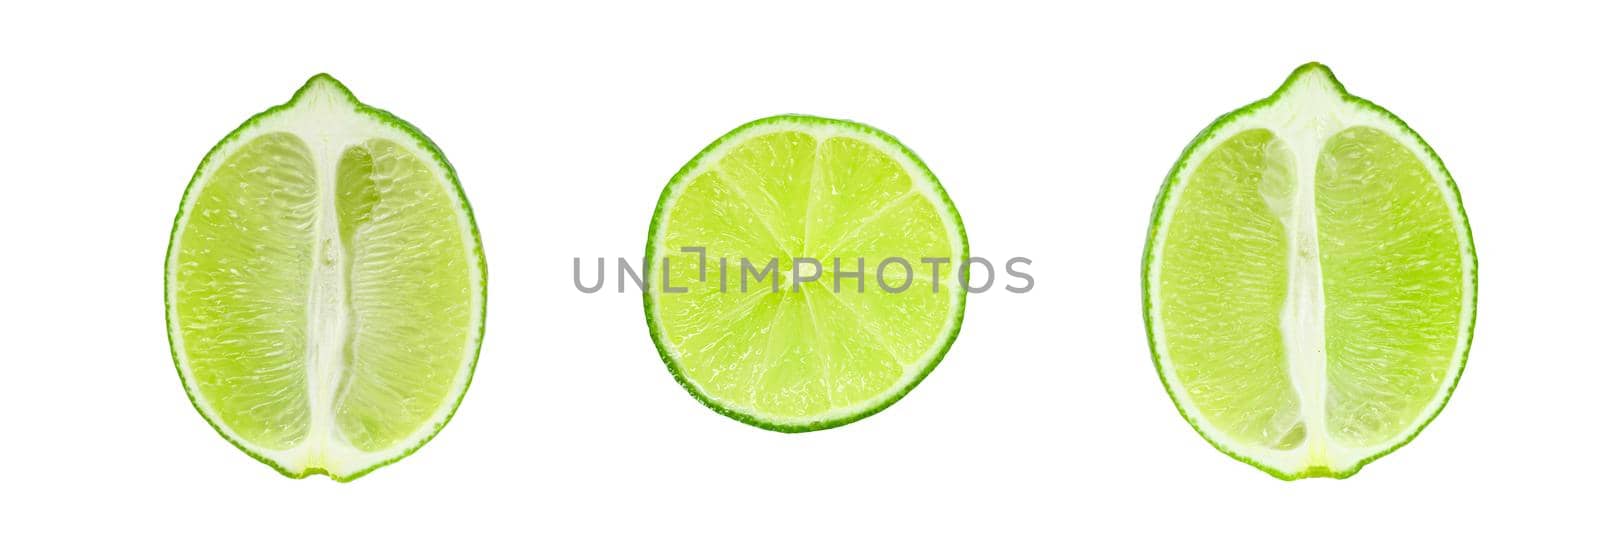 Pieces of lime isolated on white background by Fabrikasimf